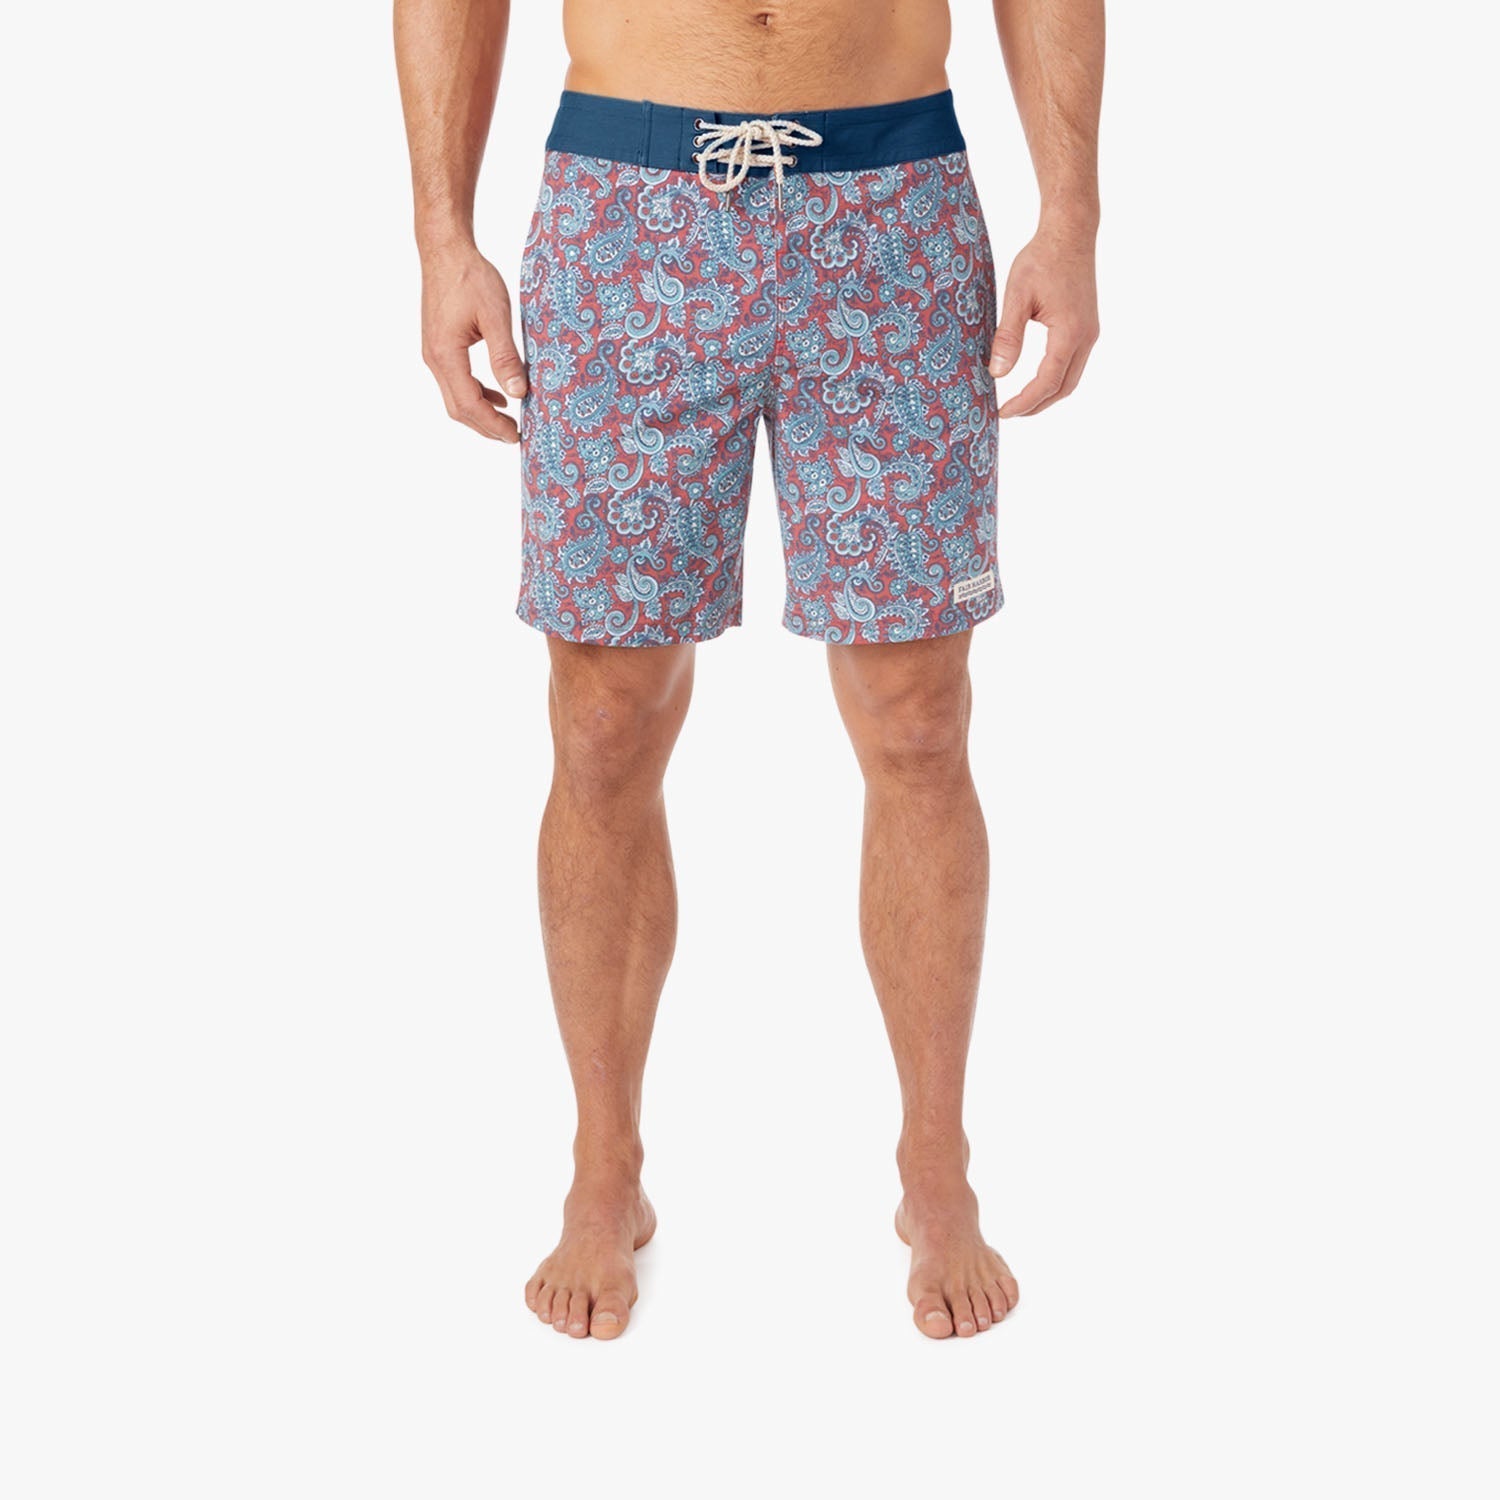 a-place-for-all-your-needs-to-buy-the-nautilus-boardshort-red-paisley-sale_1.jpg